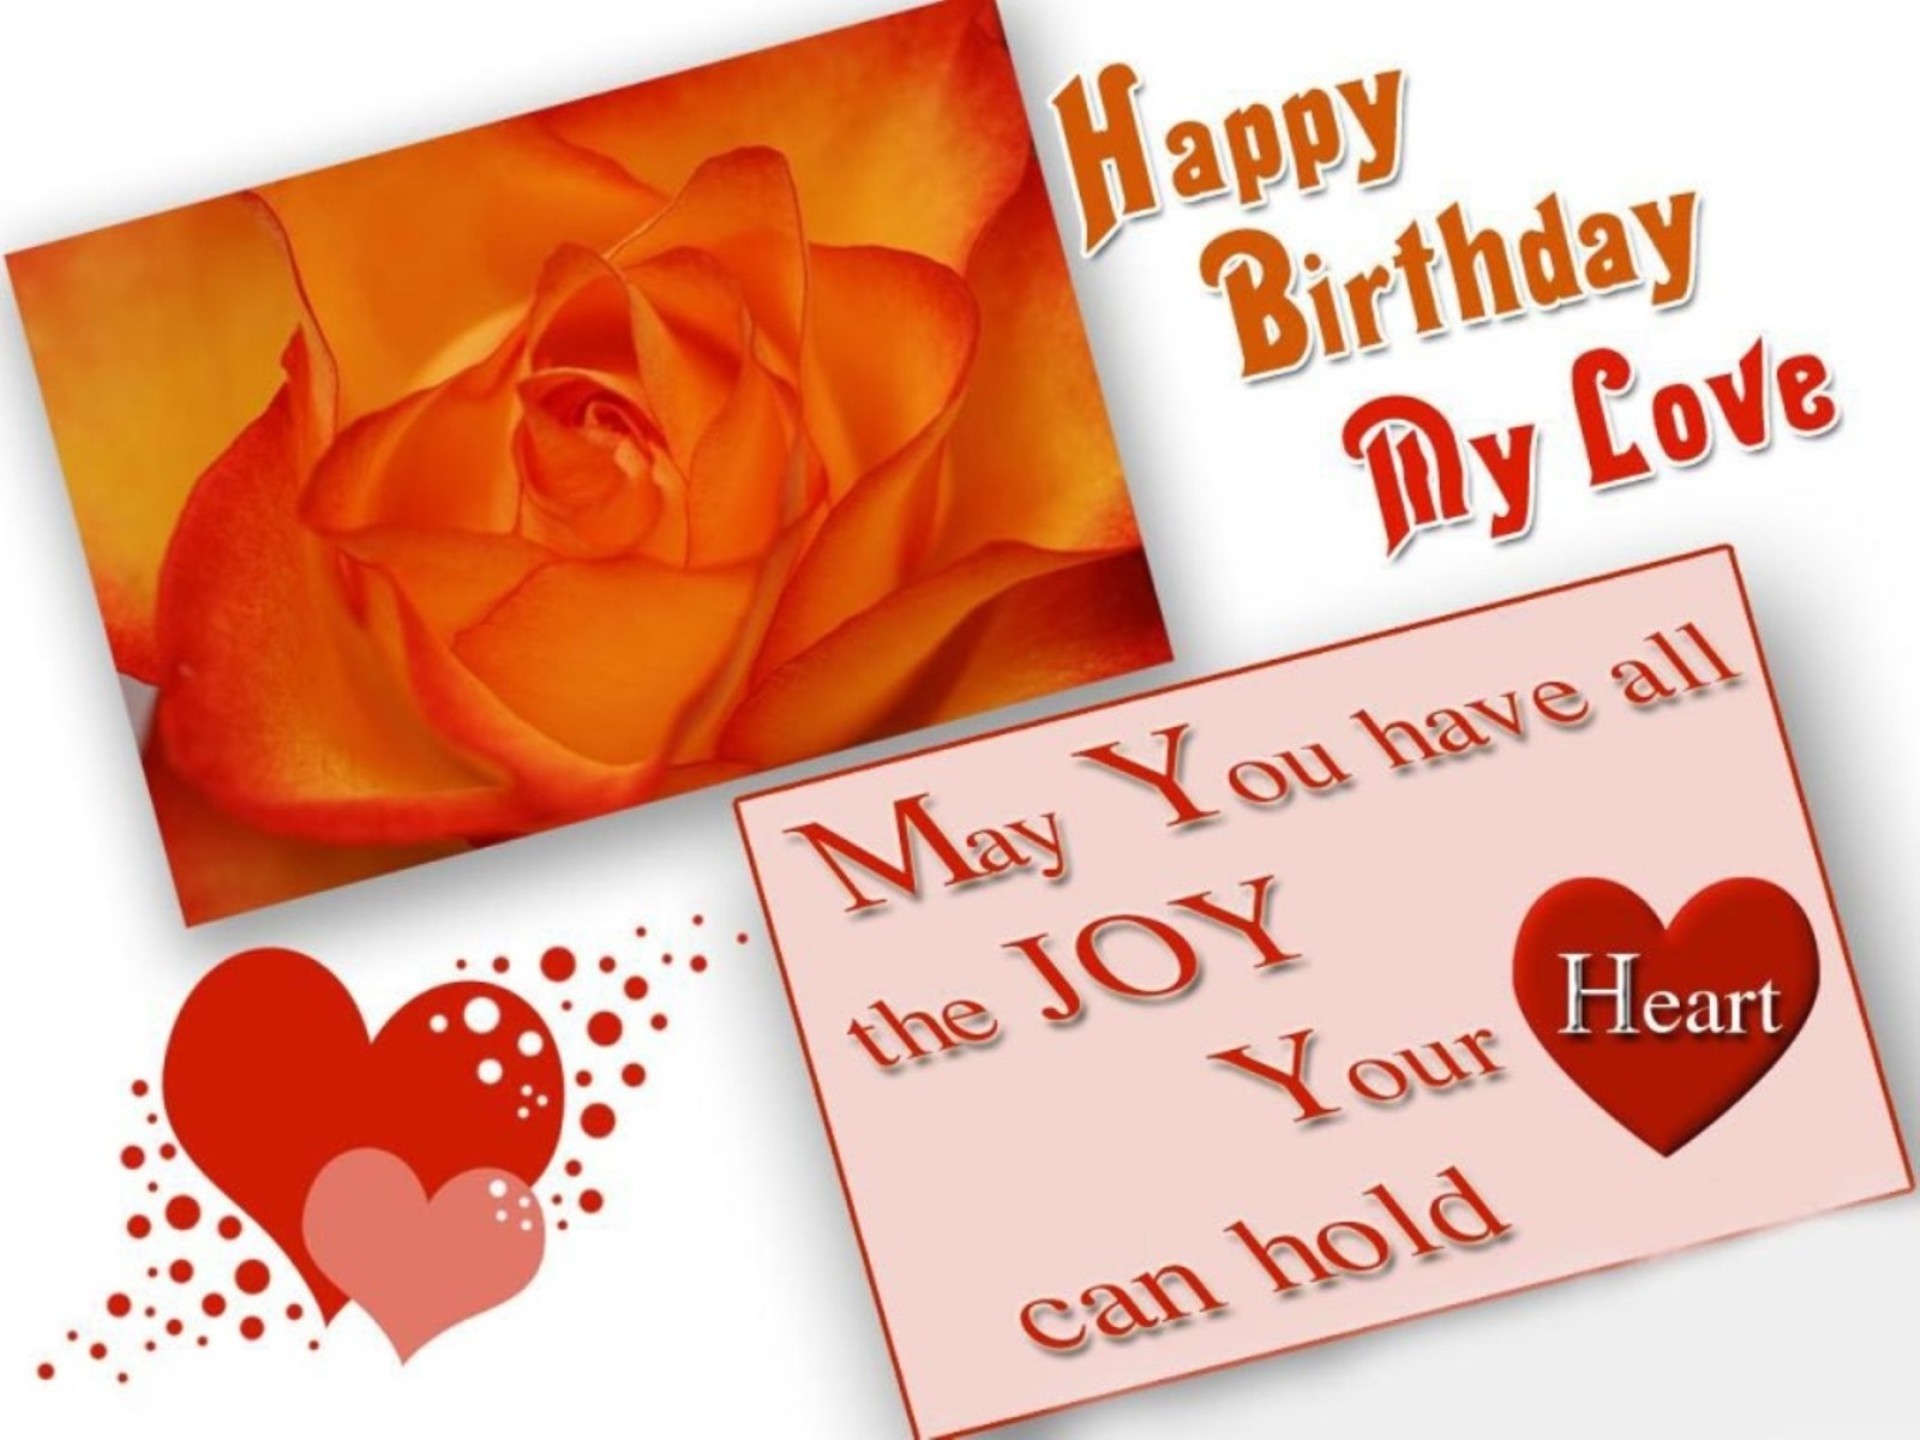 The Collection Of Romantic Birthday Wishes That Can - Happy Birthday Wishes Wallpapers Hd - HD Wallpaper 